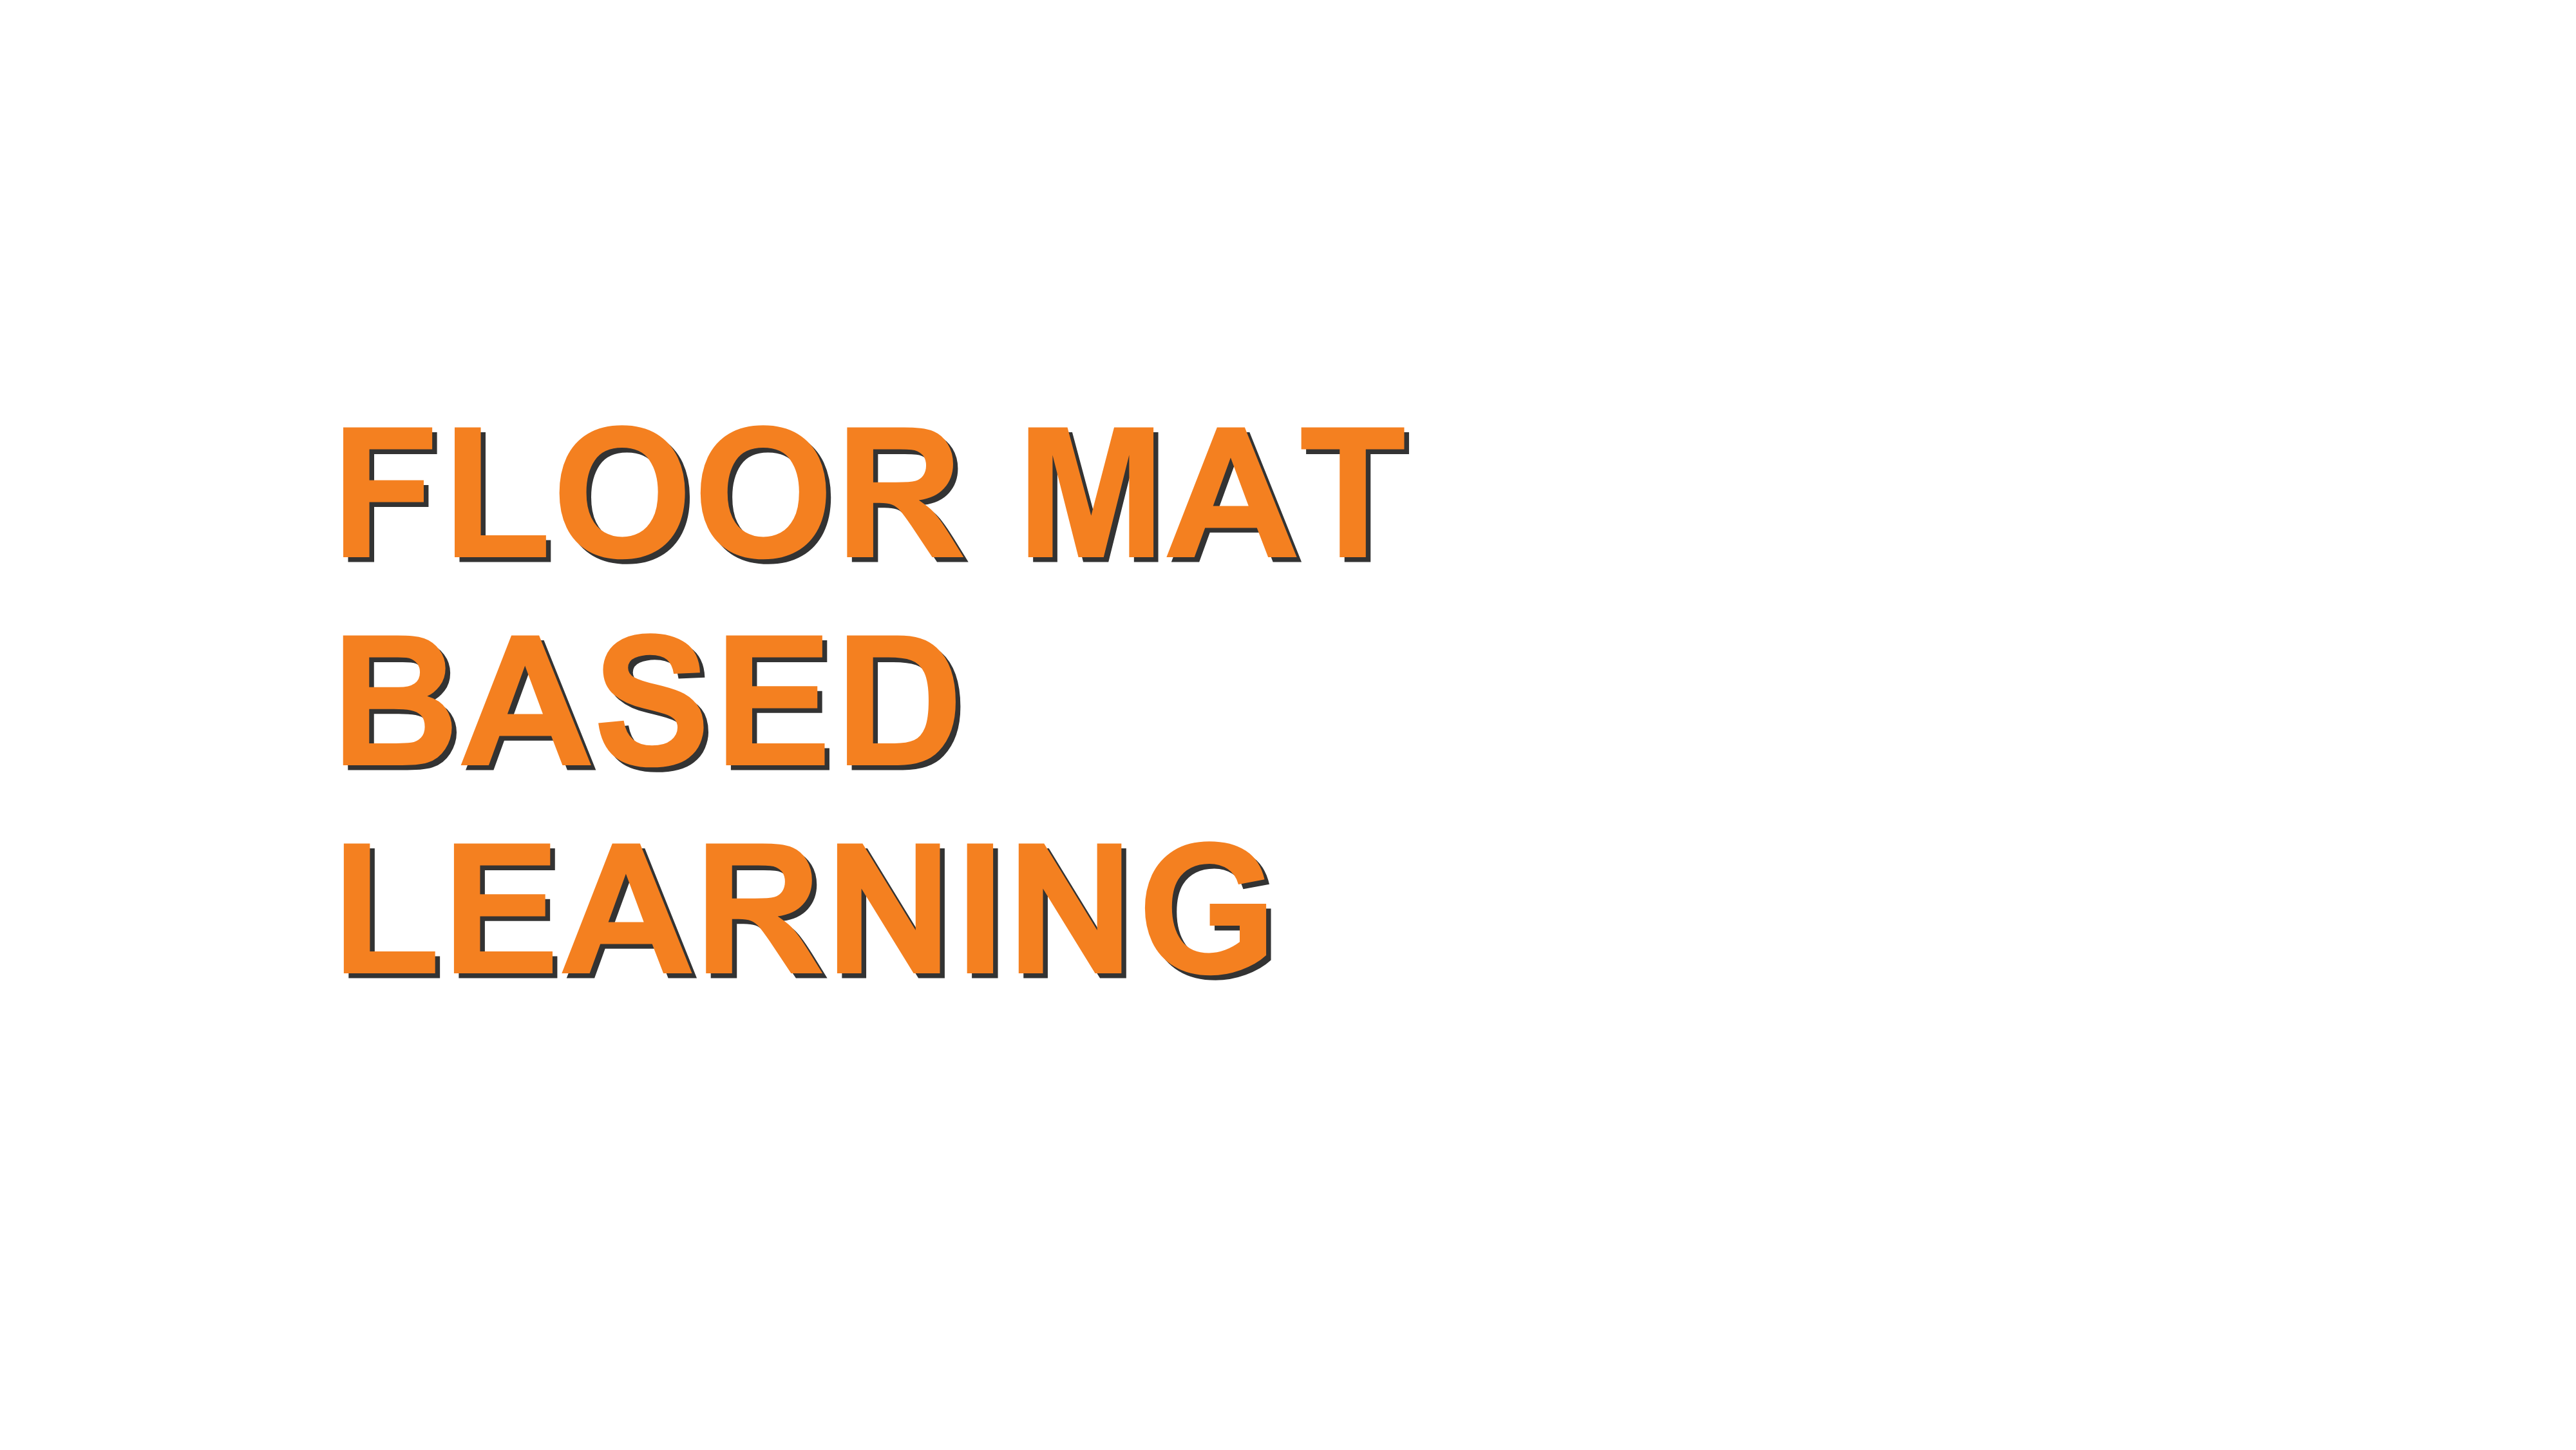 Floor Mat Based Learning Text